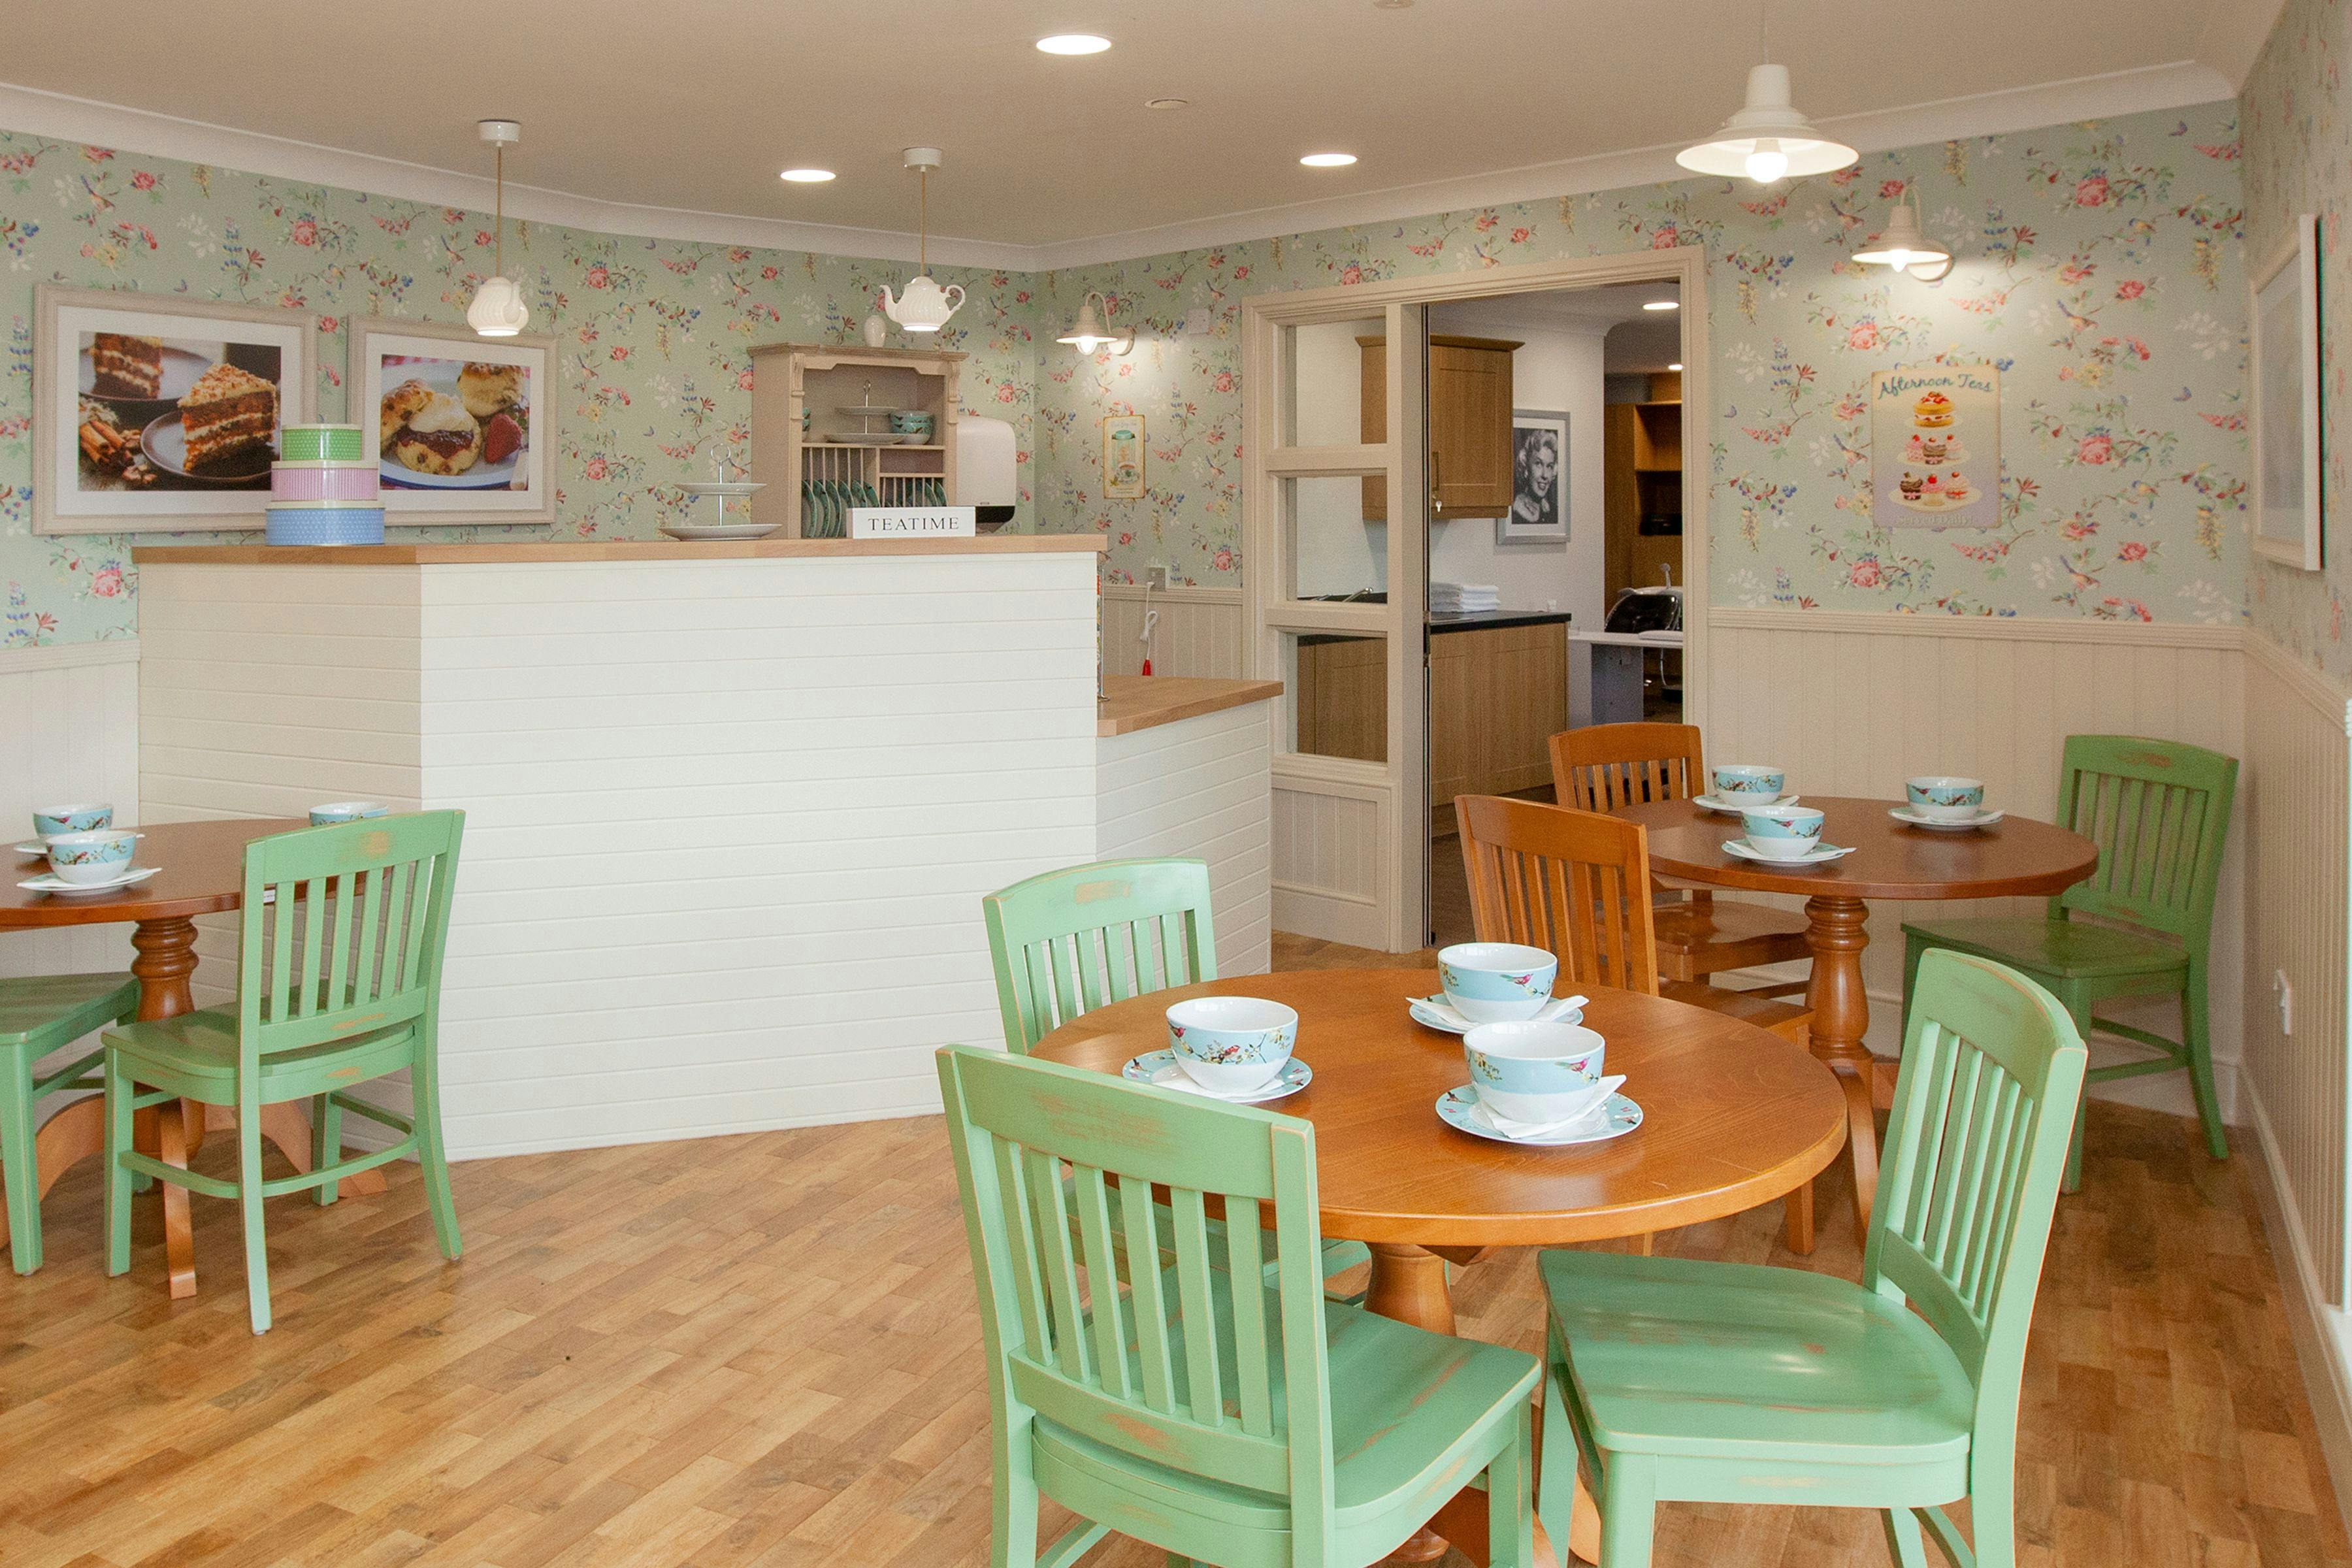 Cafe at Bedroom at Briggs Lodge Care Home in Devizes, Wiltshire